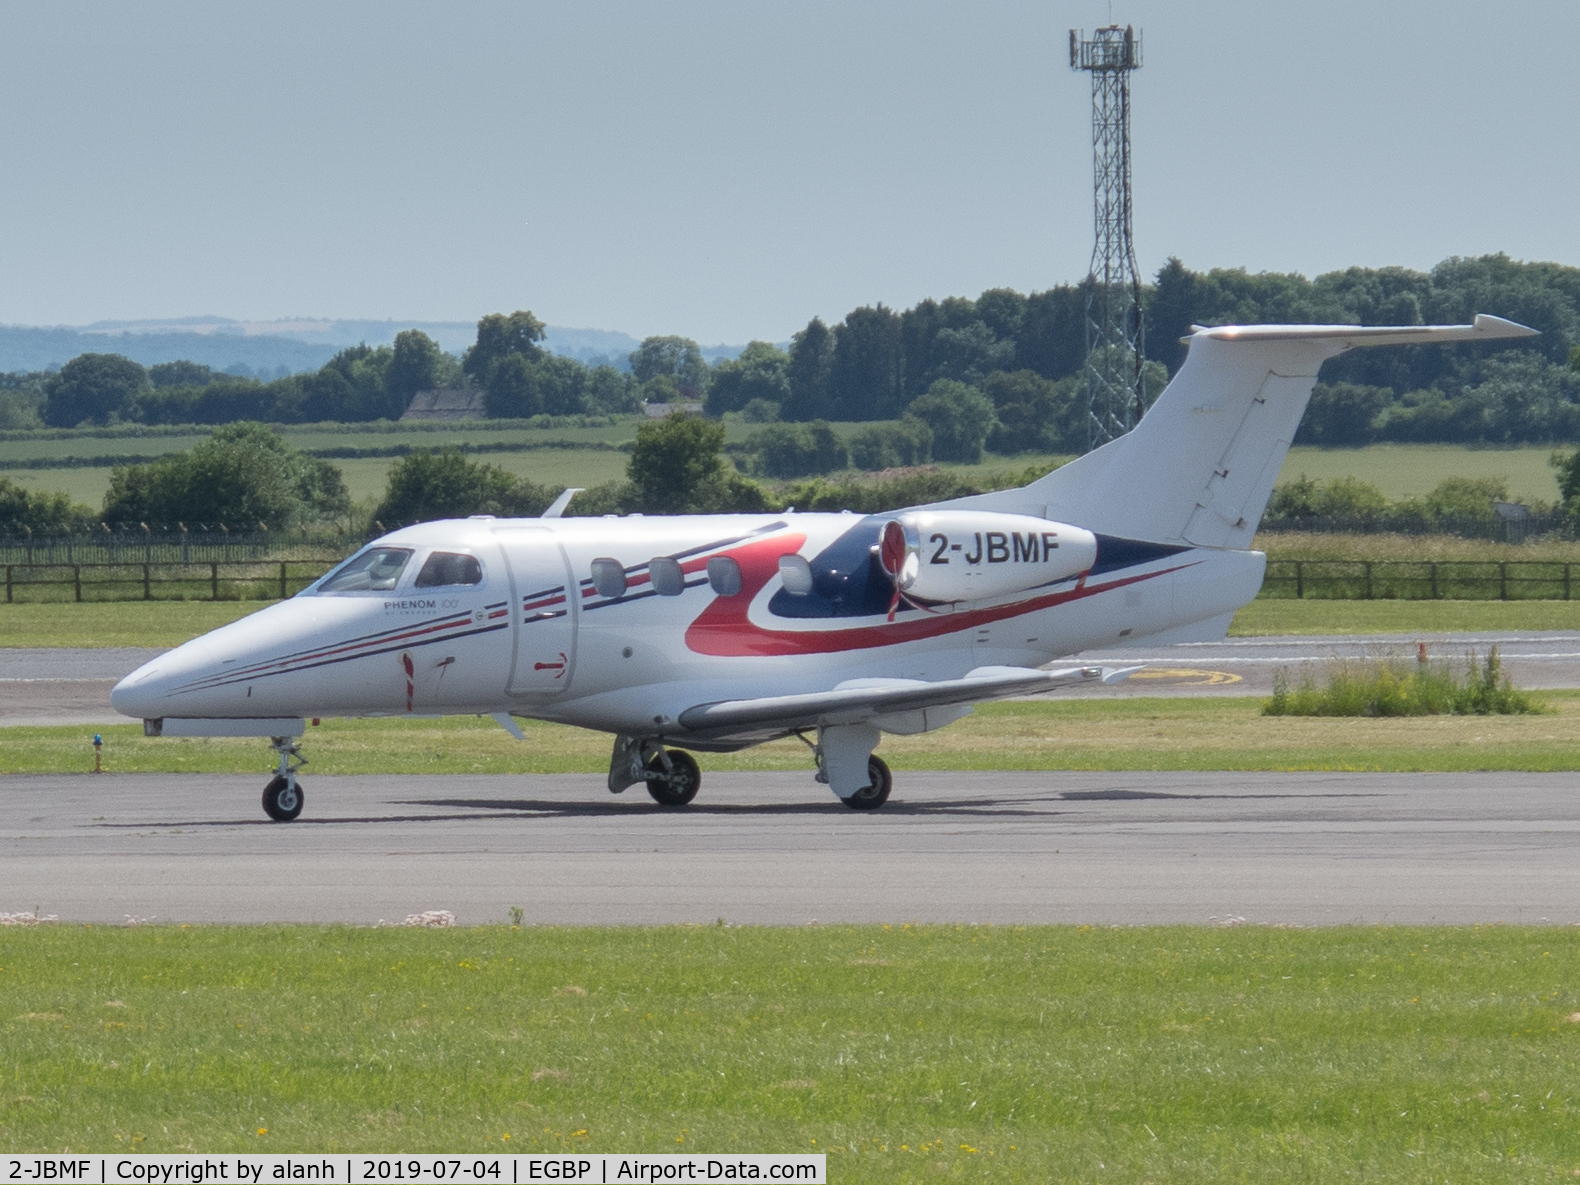 2-JBMF, 2011 Embraer EMB-500 Phenom 100 C/N 50000250, Parked at Cotswold Airport (Kemble)